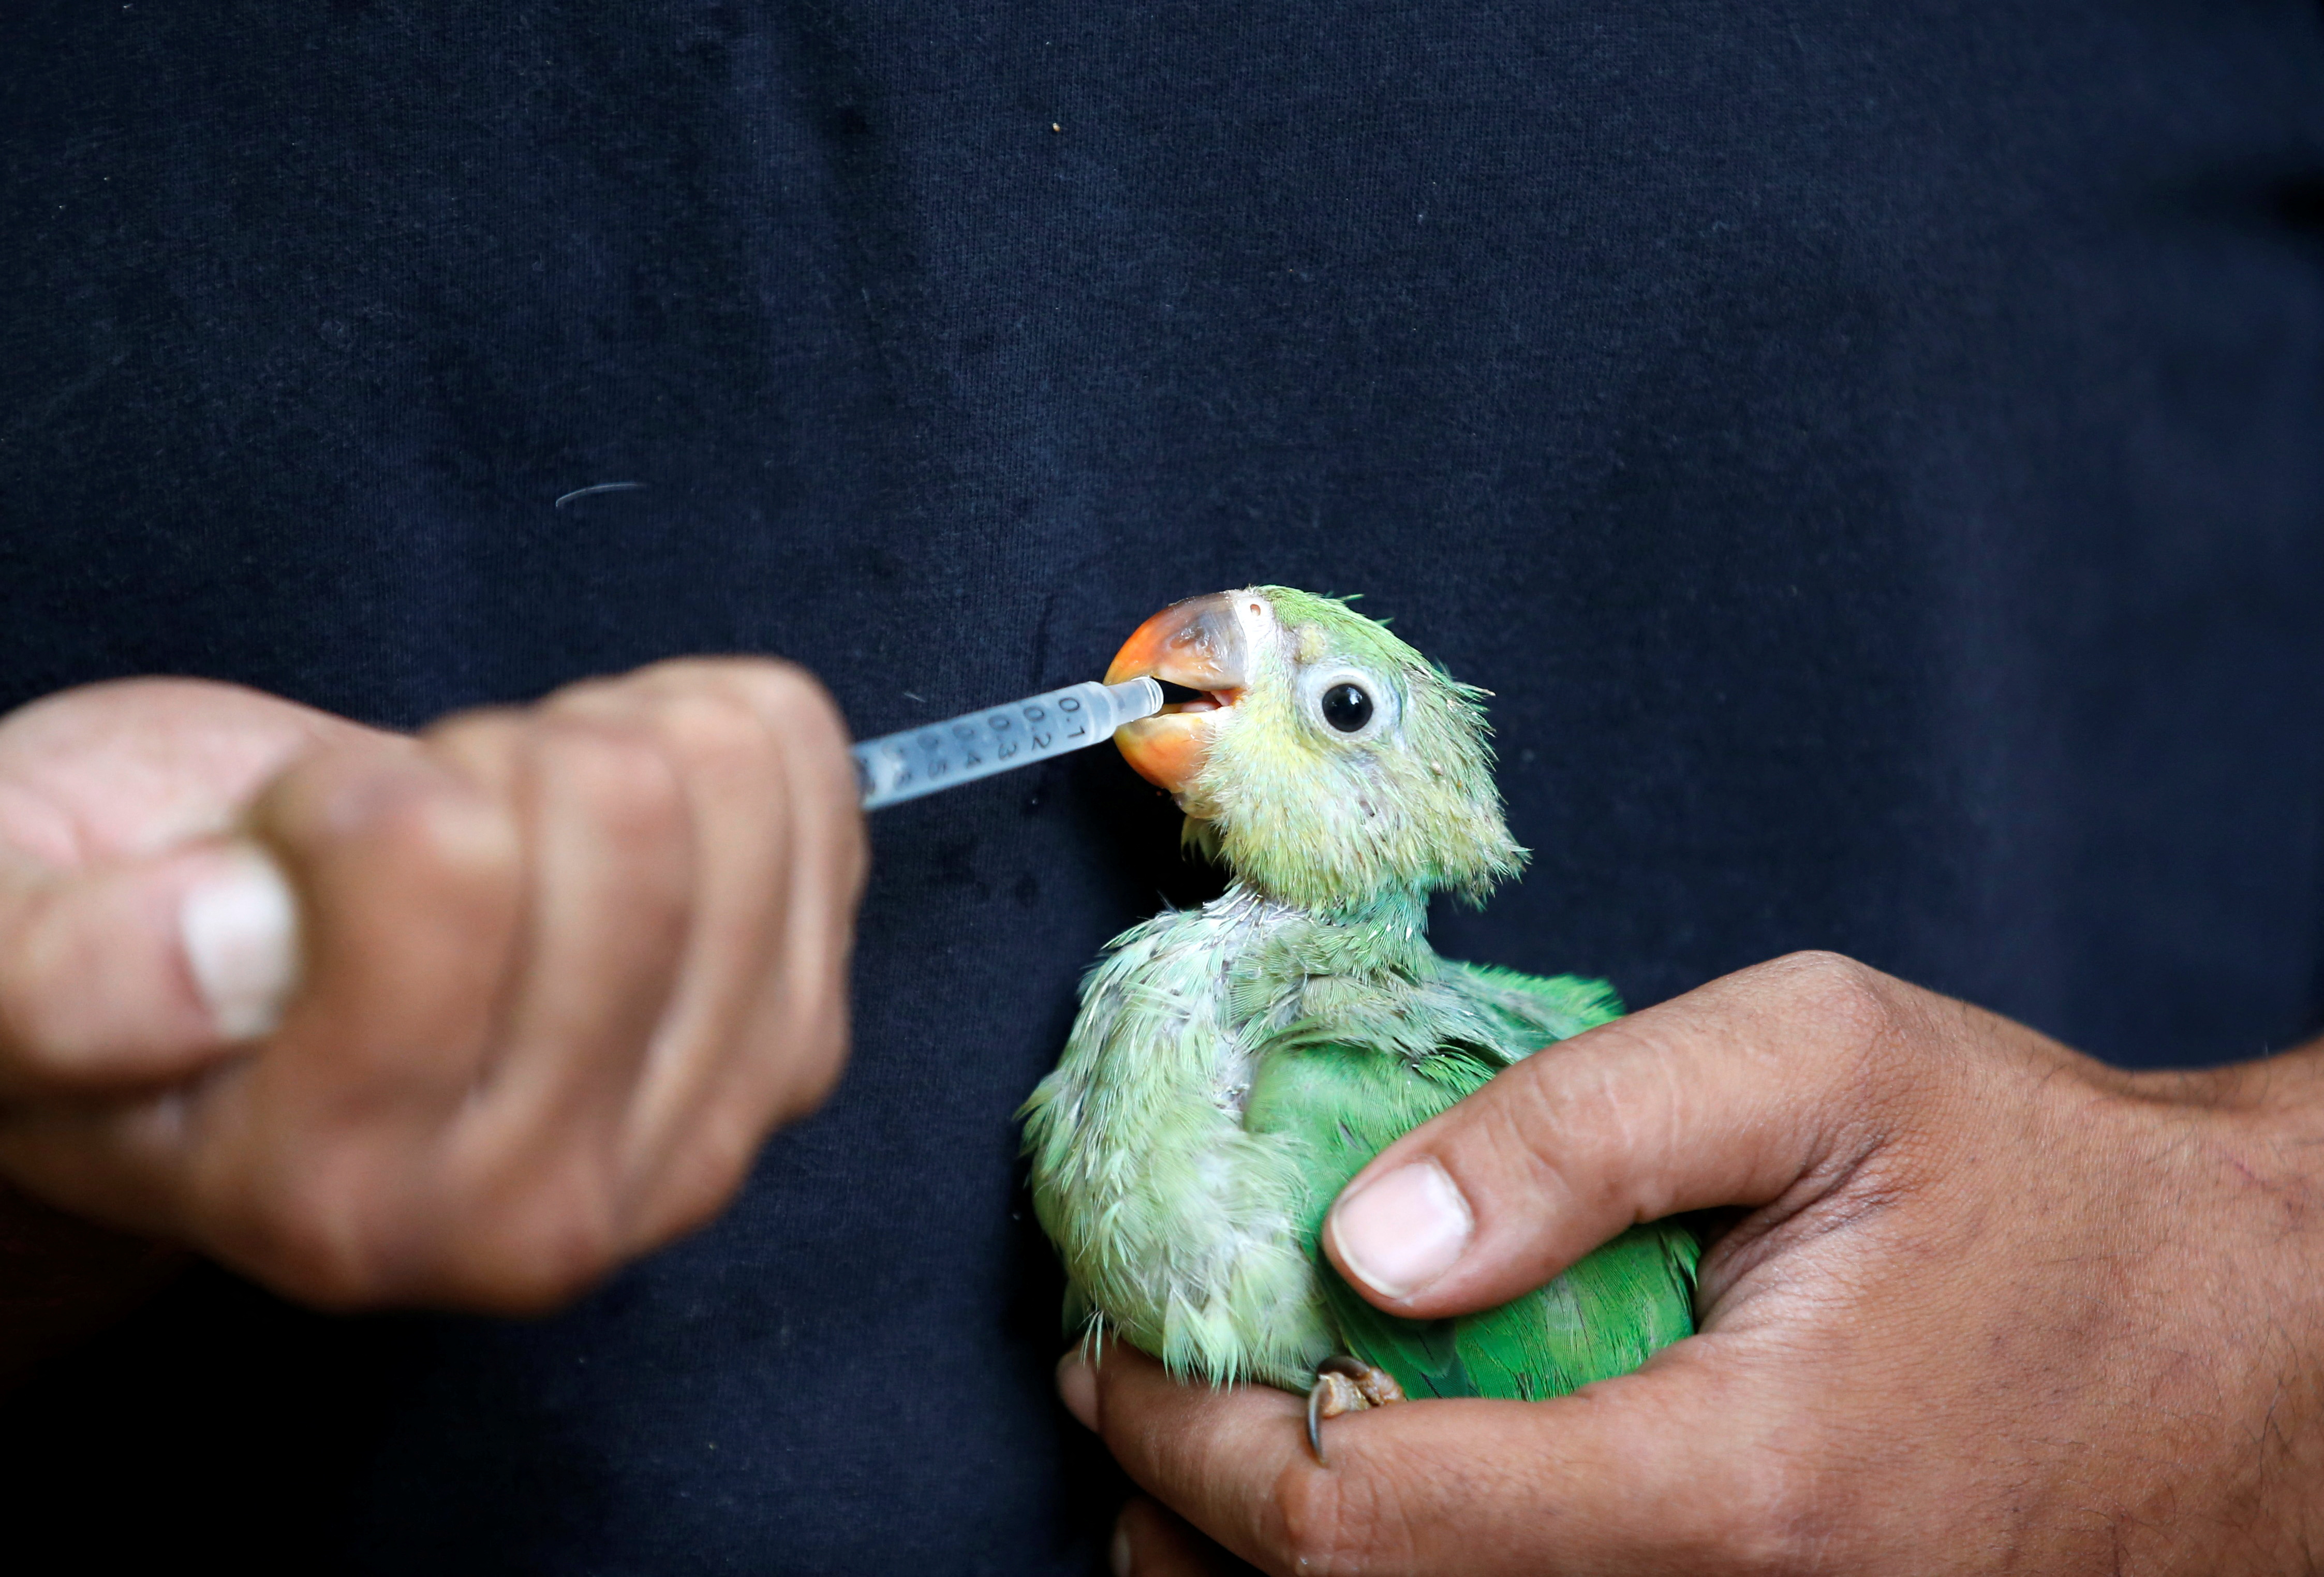 A caretaker feeds water mixed with multivitamins to a parakeet after it was dehydrated due to heat at Jivdaya Charitable Trust in Ahmedabad